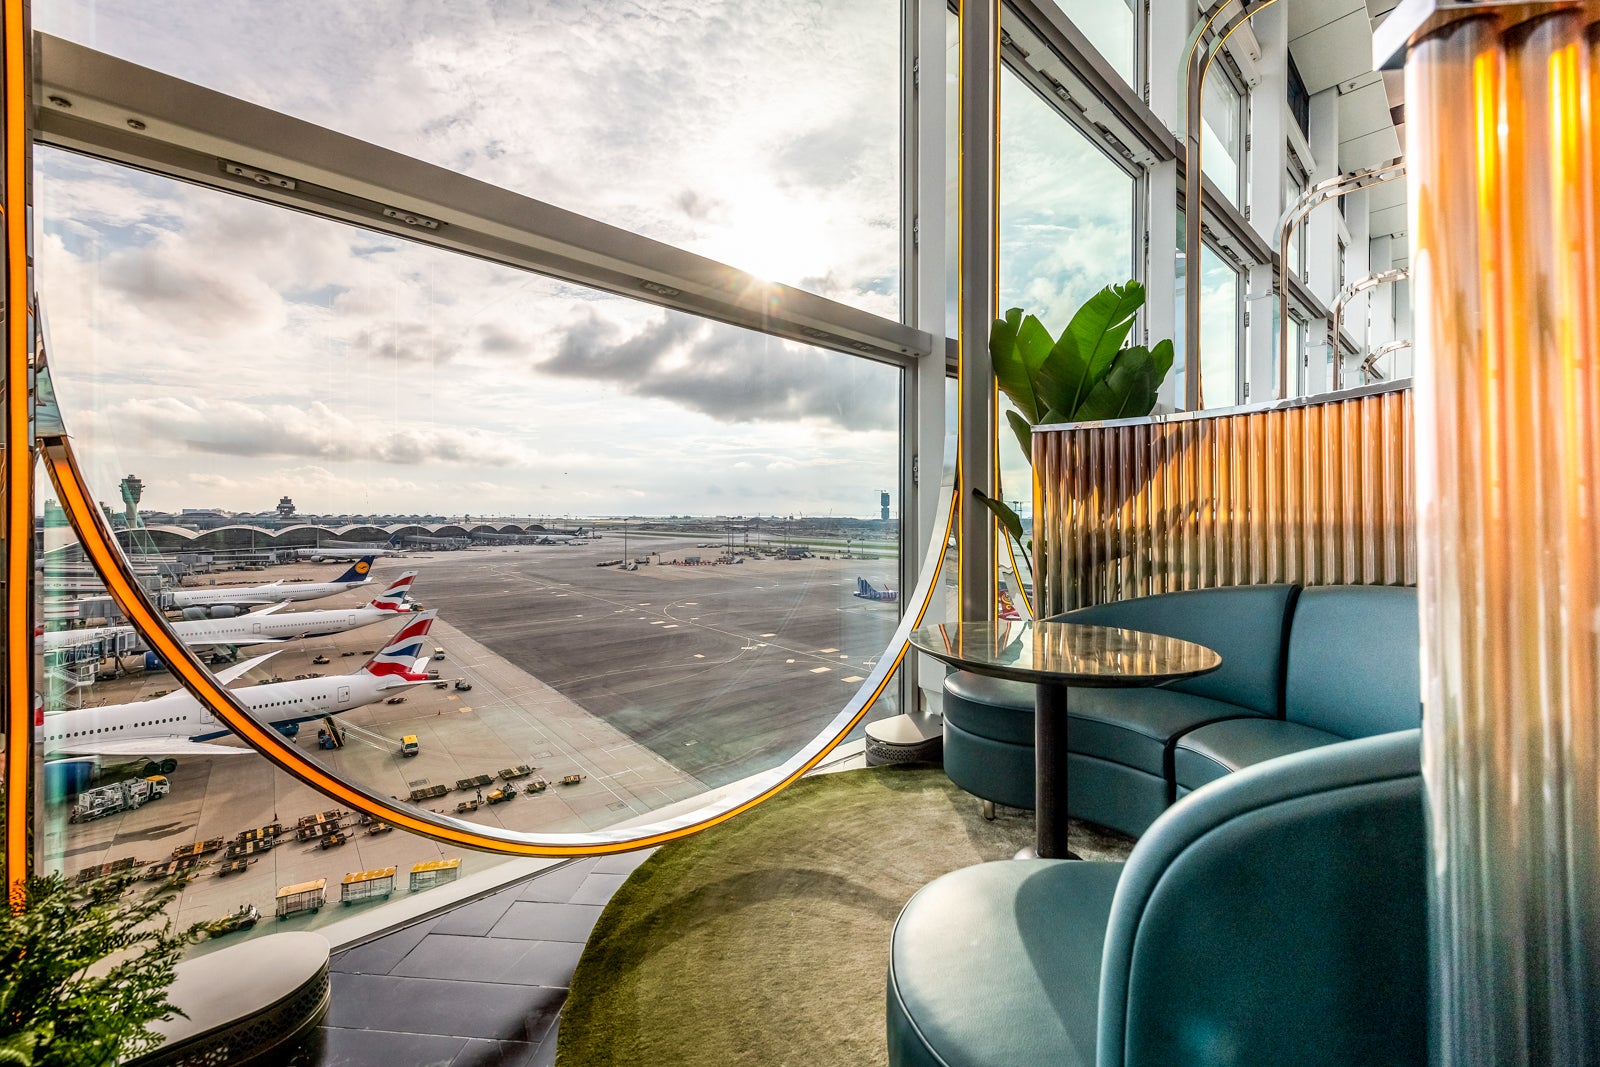 The New Airport Congestion: Plane Spotters Crowd Fancy Hotel Bars